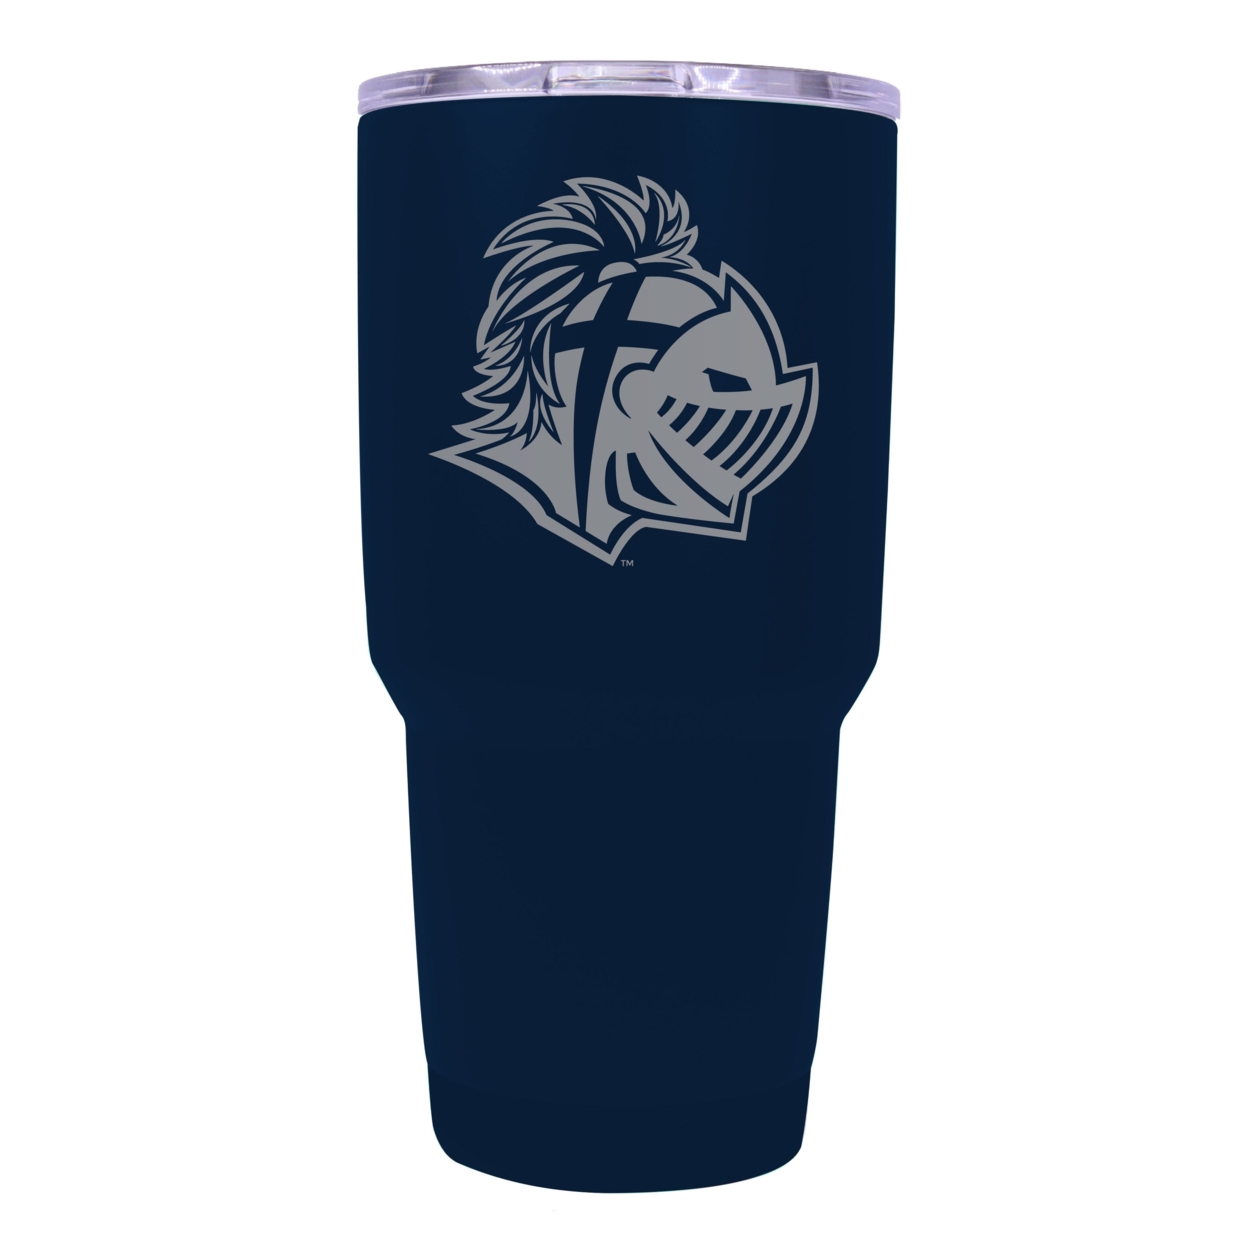 Southern Wesleyan University 24 Oz Laser Engraved Stainless Steel Insulated Tumbler - Choose Your Color. - Red